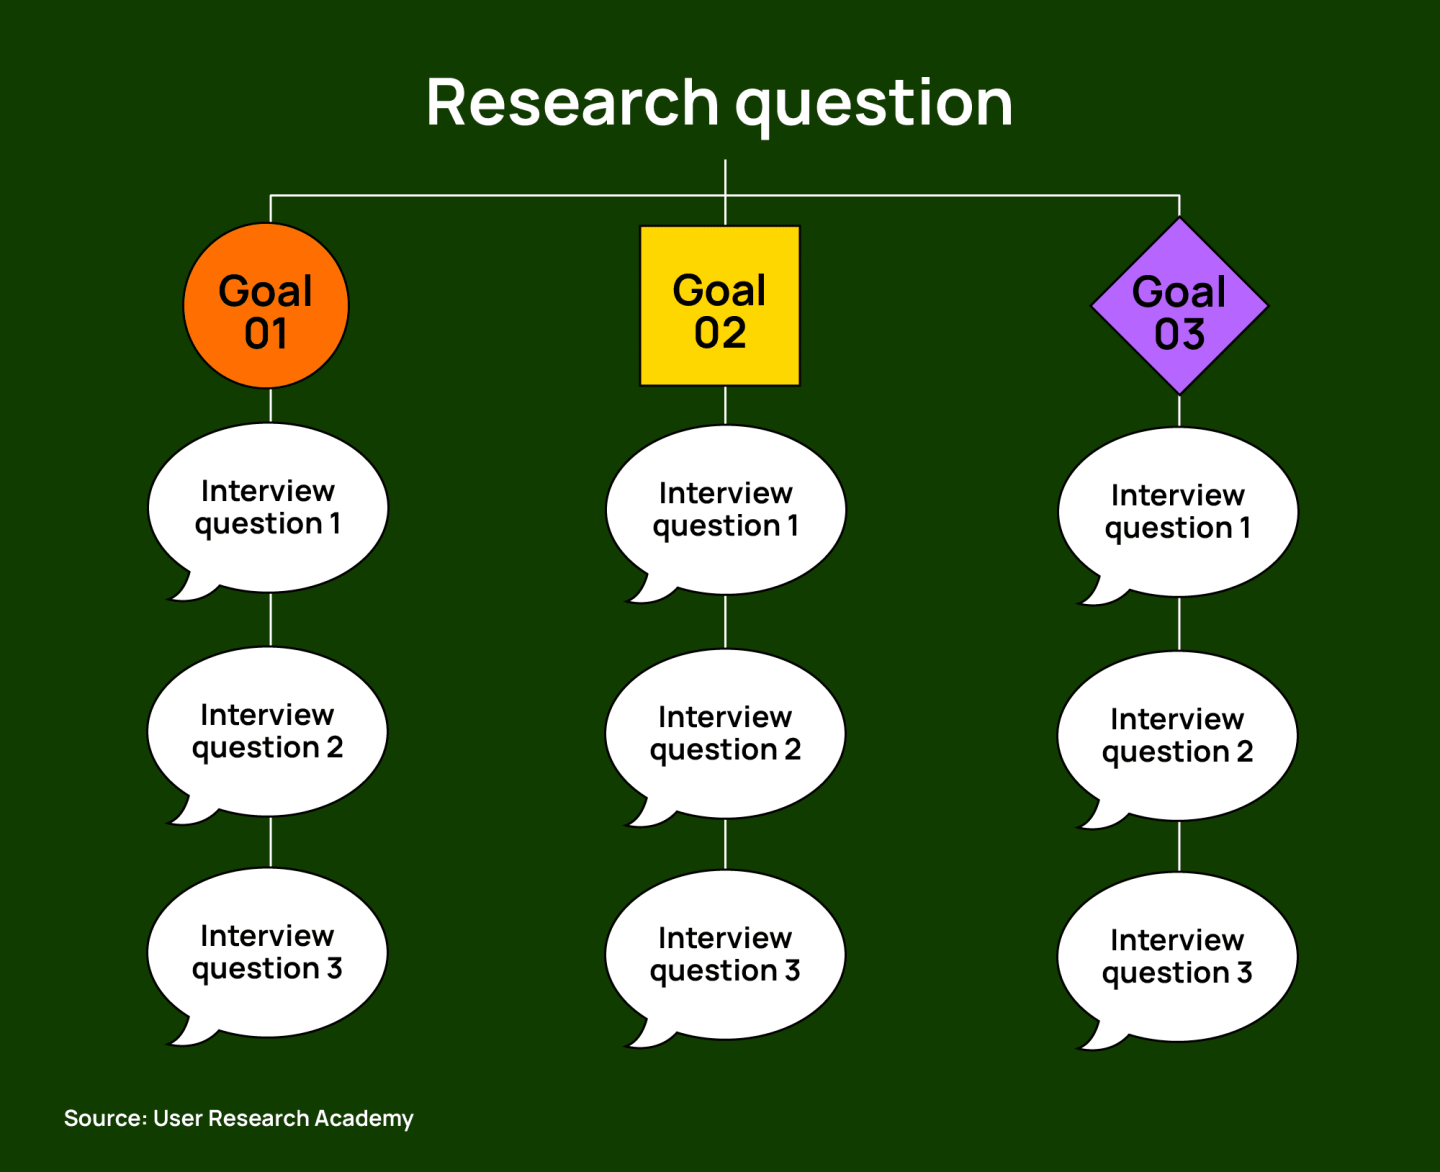 Start with a solid foundation—research question to goals to interview questions.